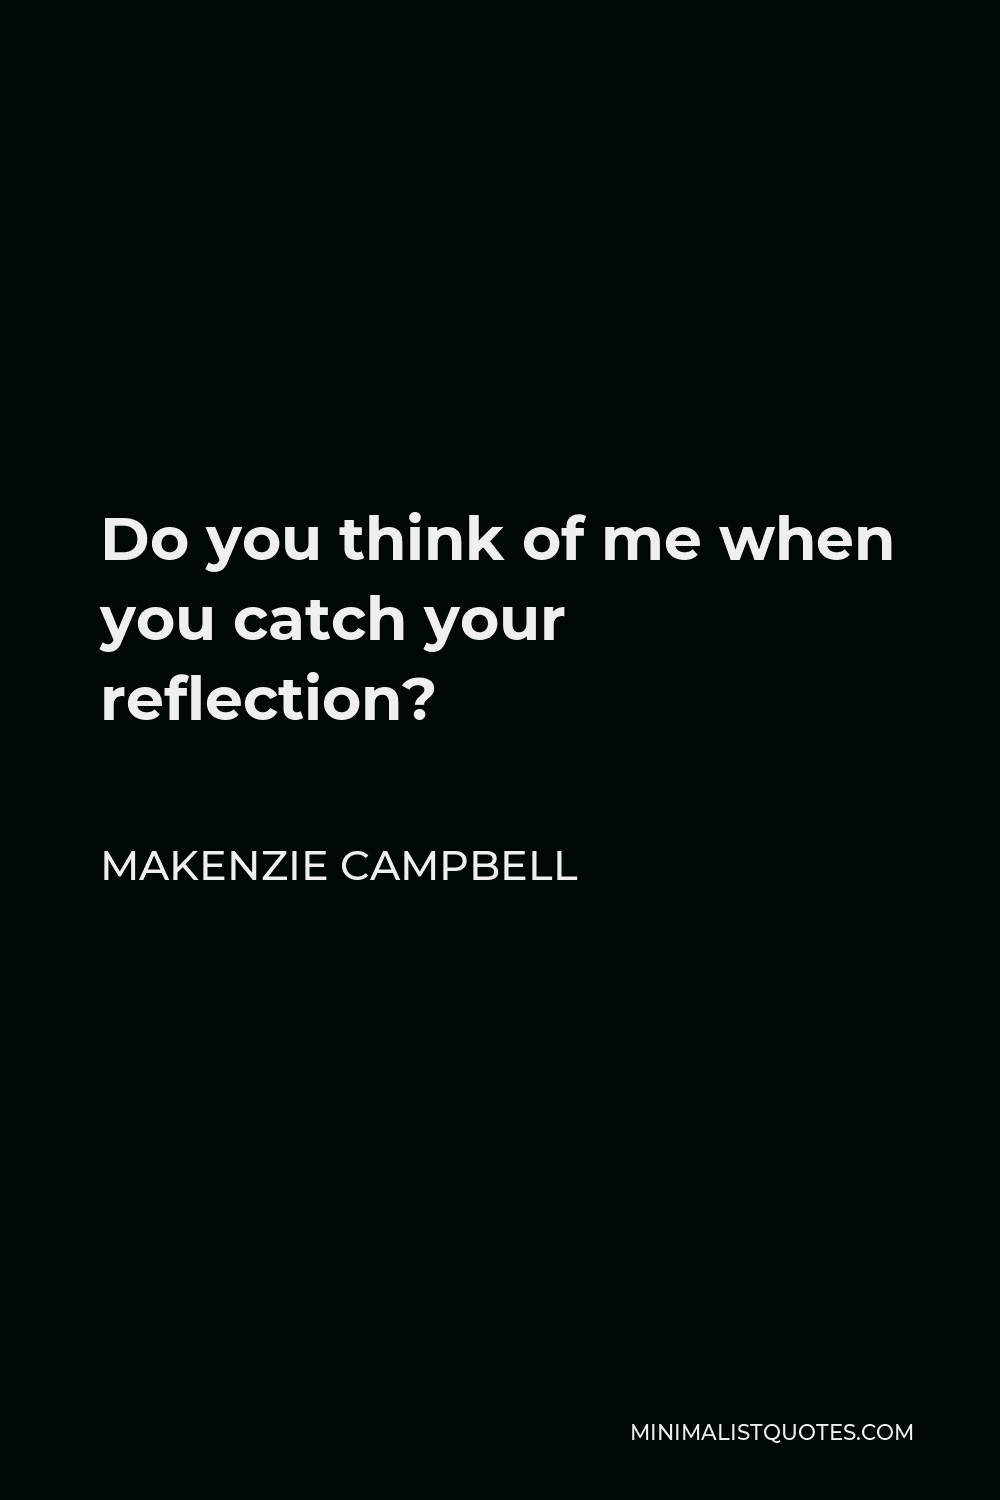 Makenzie Campbell Quote - Do you think of me when you catch your reflection?